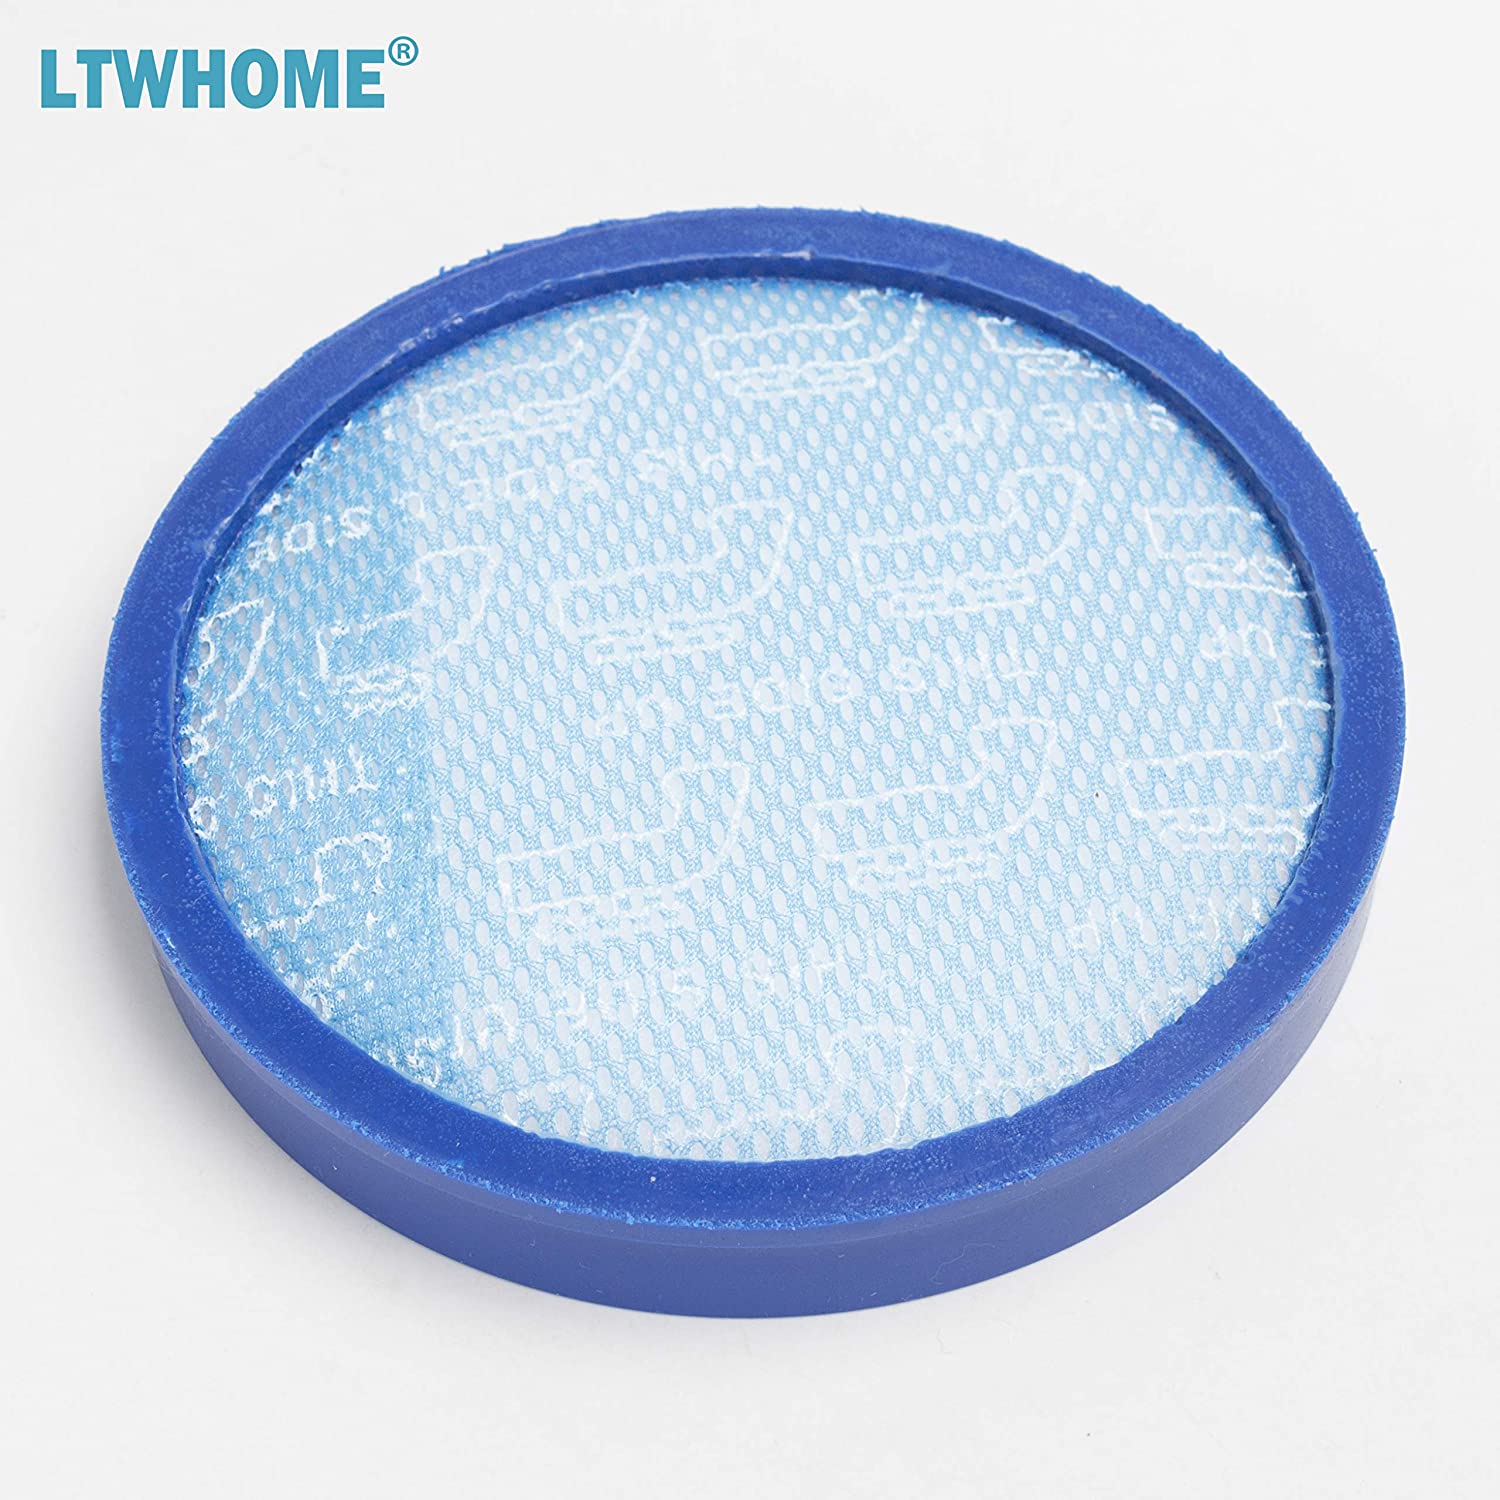 LTWHOME Replacement Primary Blue Sponge Filter Fit for Hoover WindTunnel, Elite Whole House Bagless Upright Vacuum Cleaners, Compares to Part No 304087001 (Pack of 2)